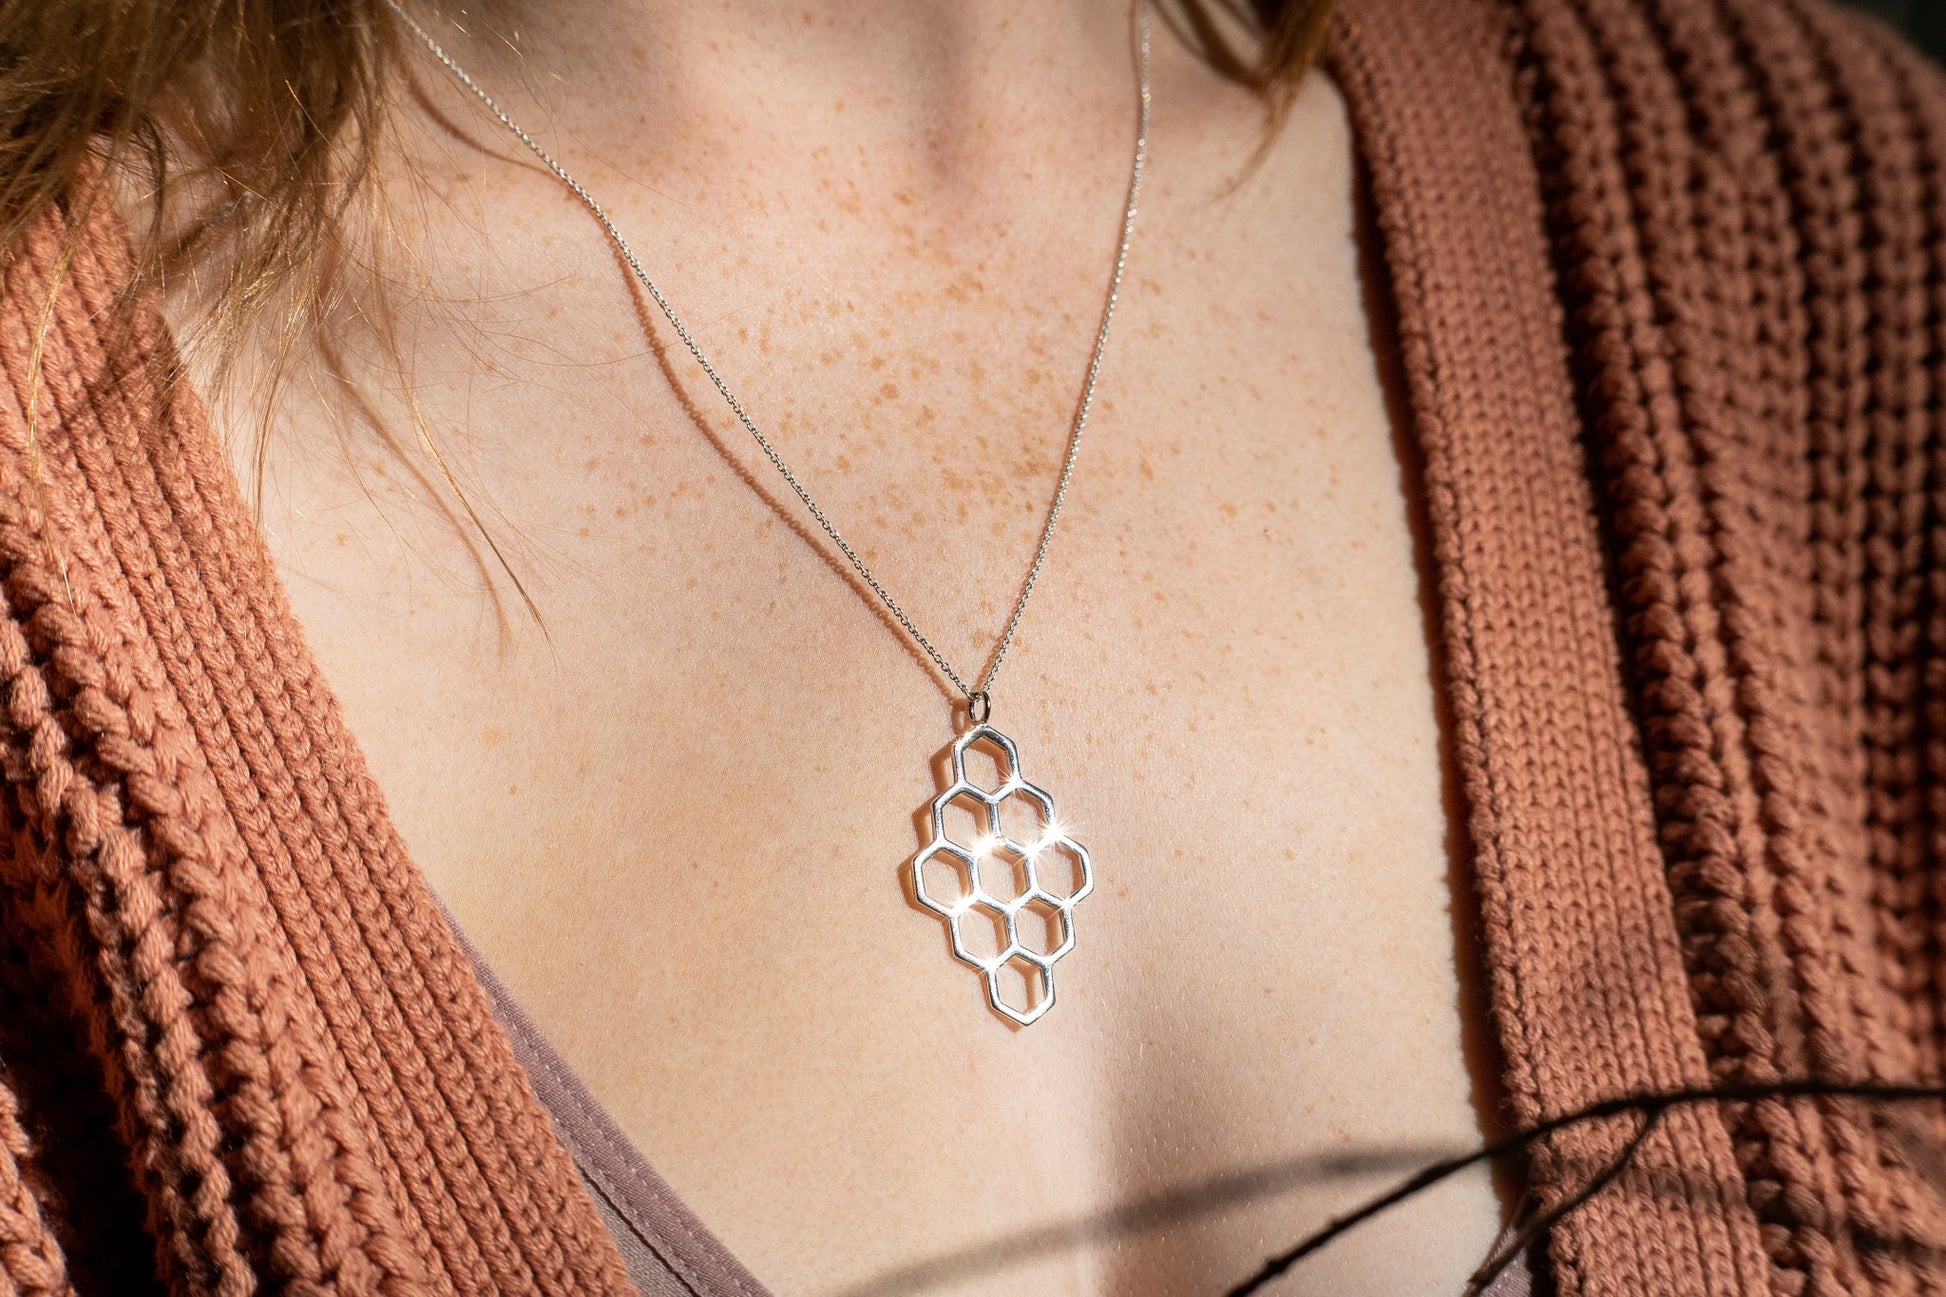 silver dimaond shaped honeycomb pendant necklace glimmering in the sun